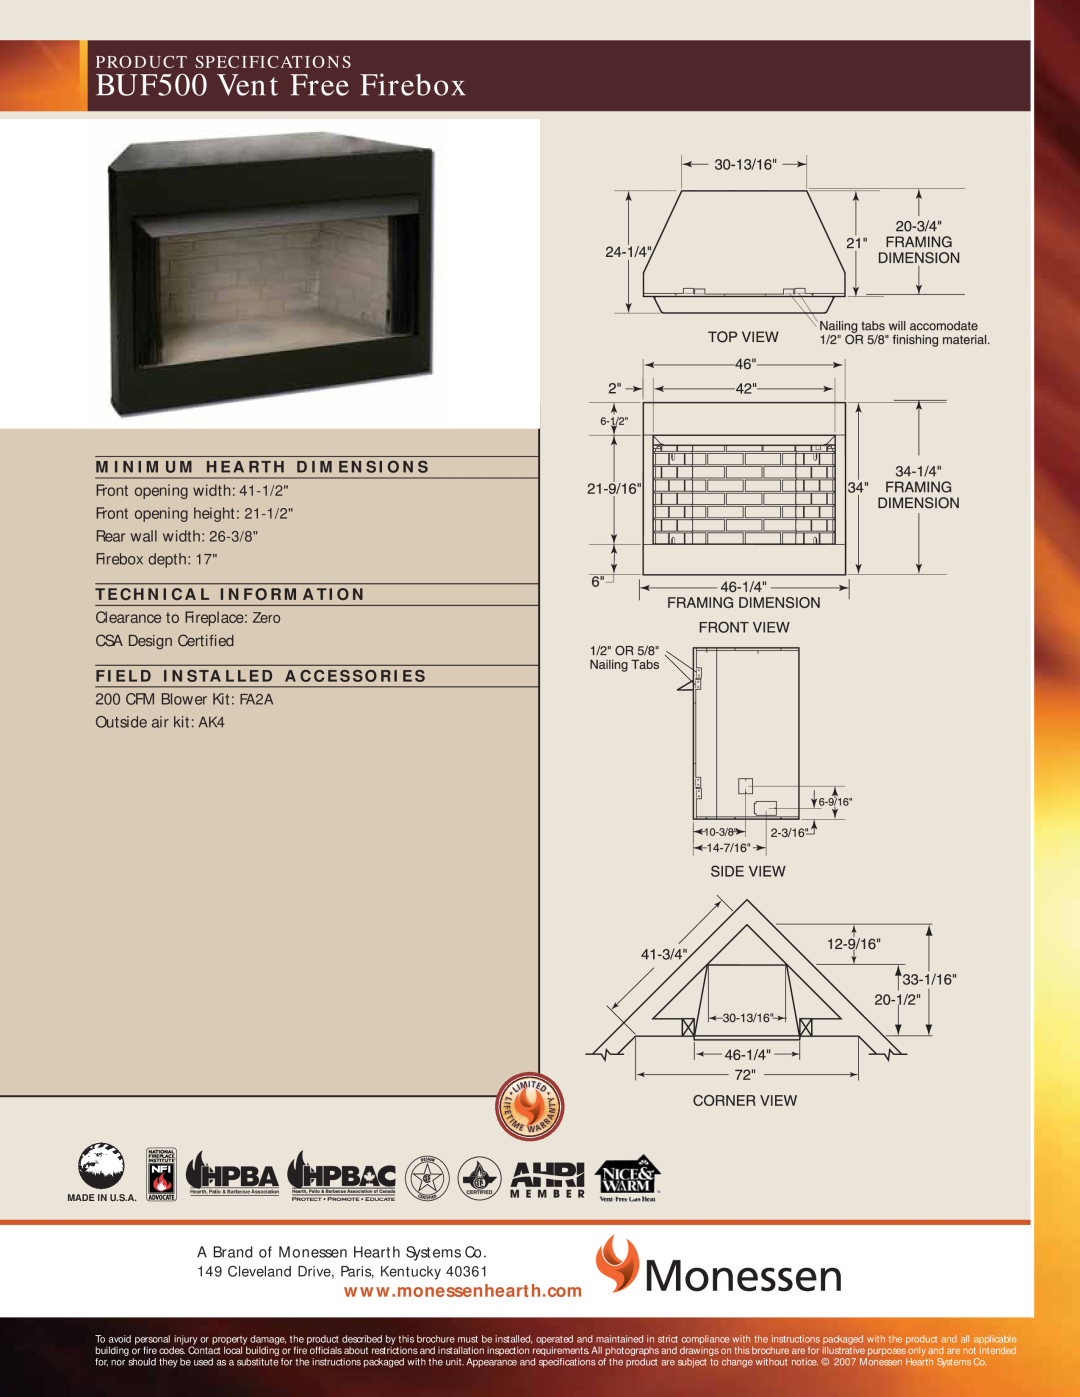 Monessen Hearth specifications BUF500 Vent Free Firebox, Product Specifications, Front opening width 41-1/2 